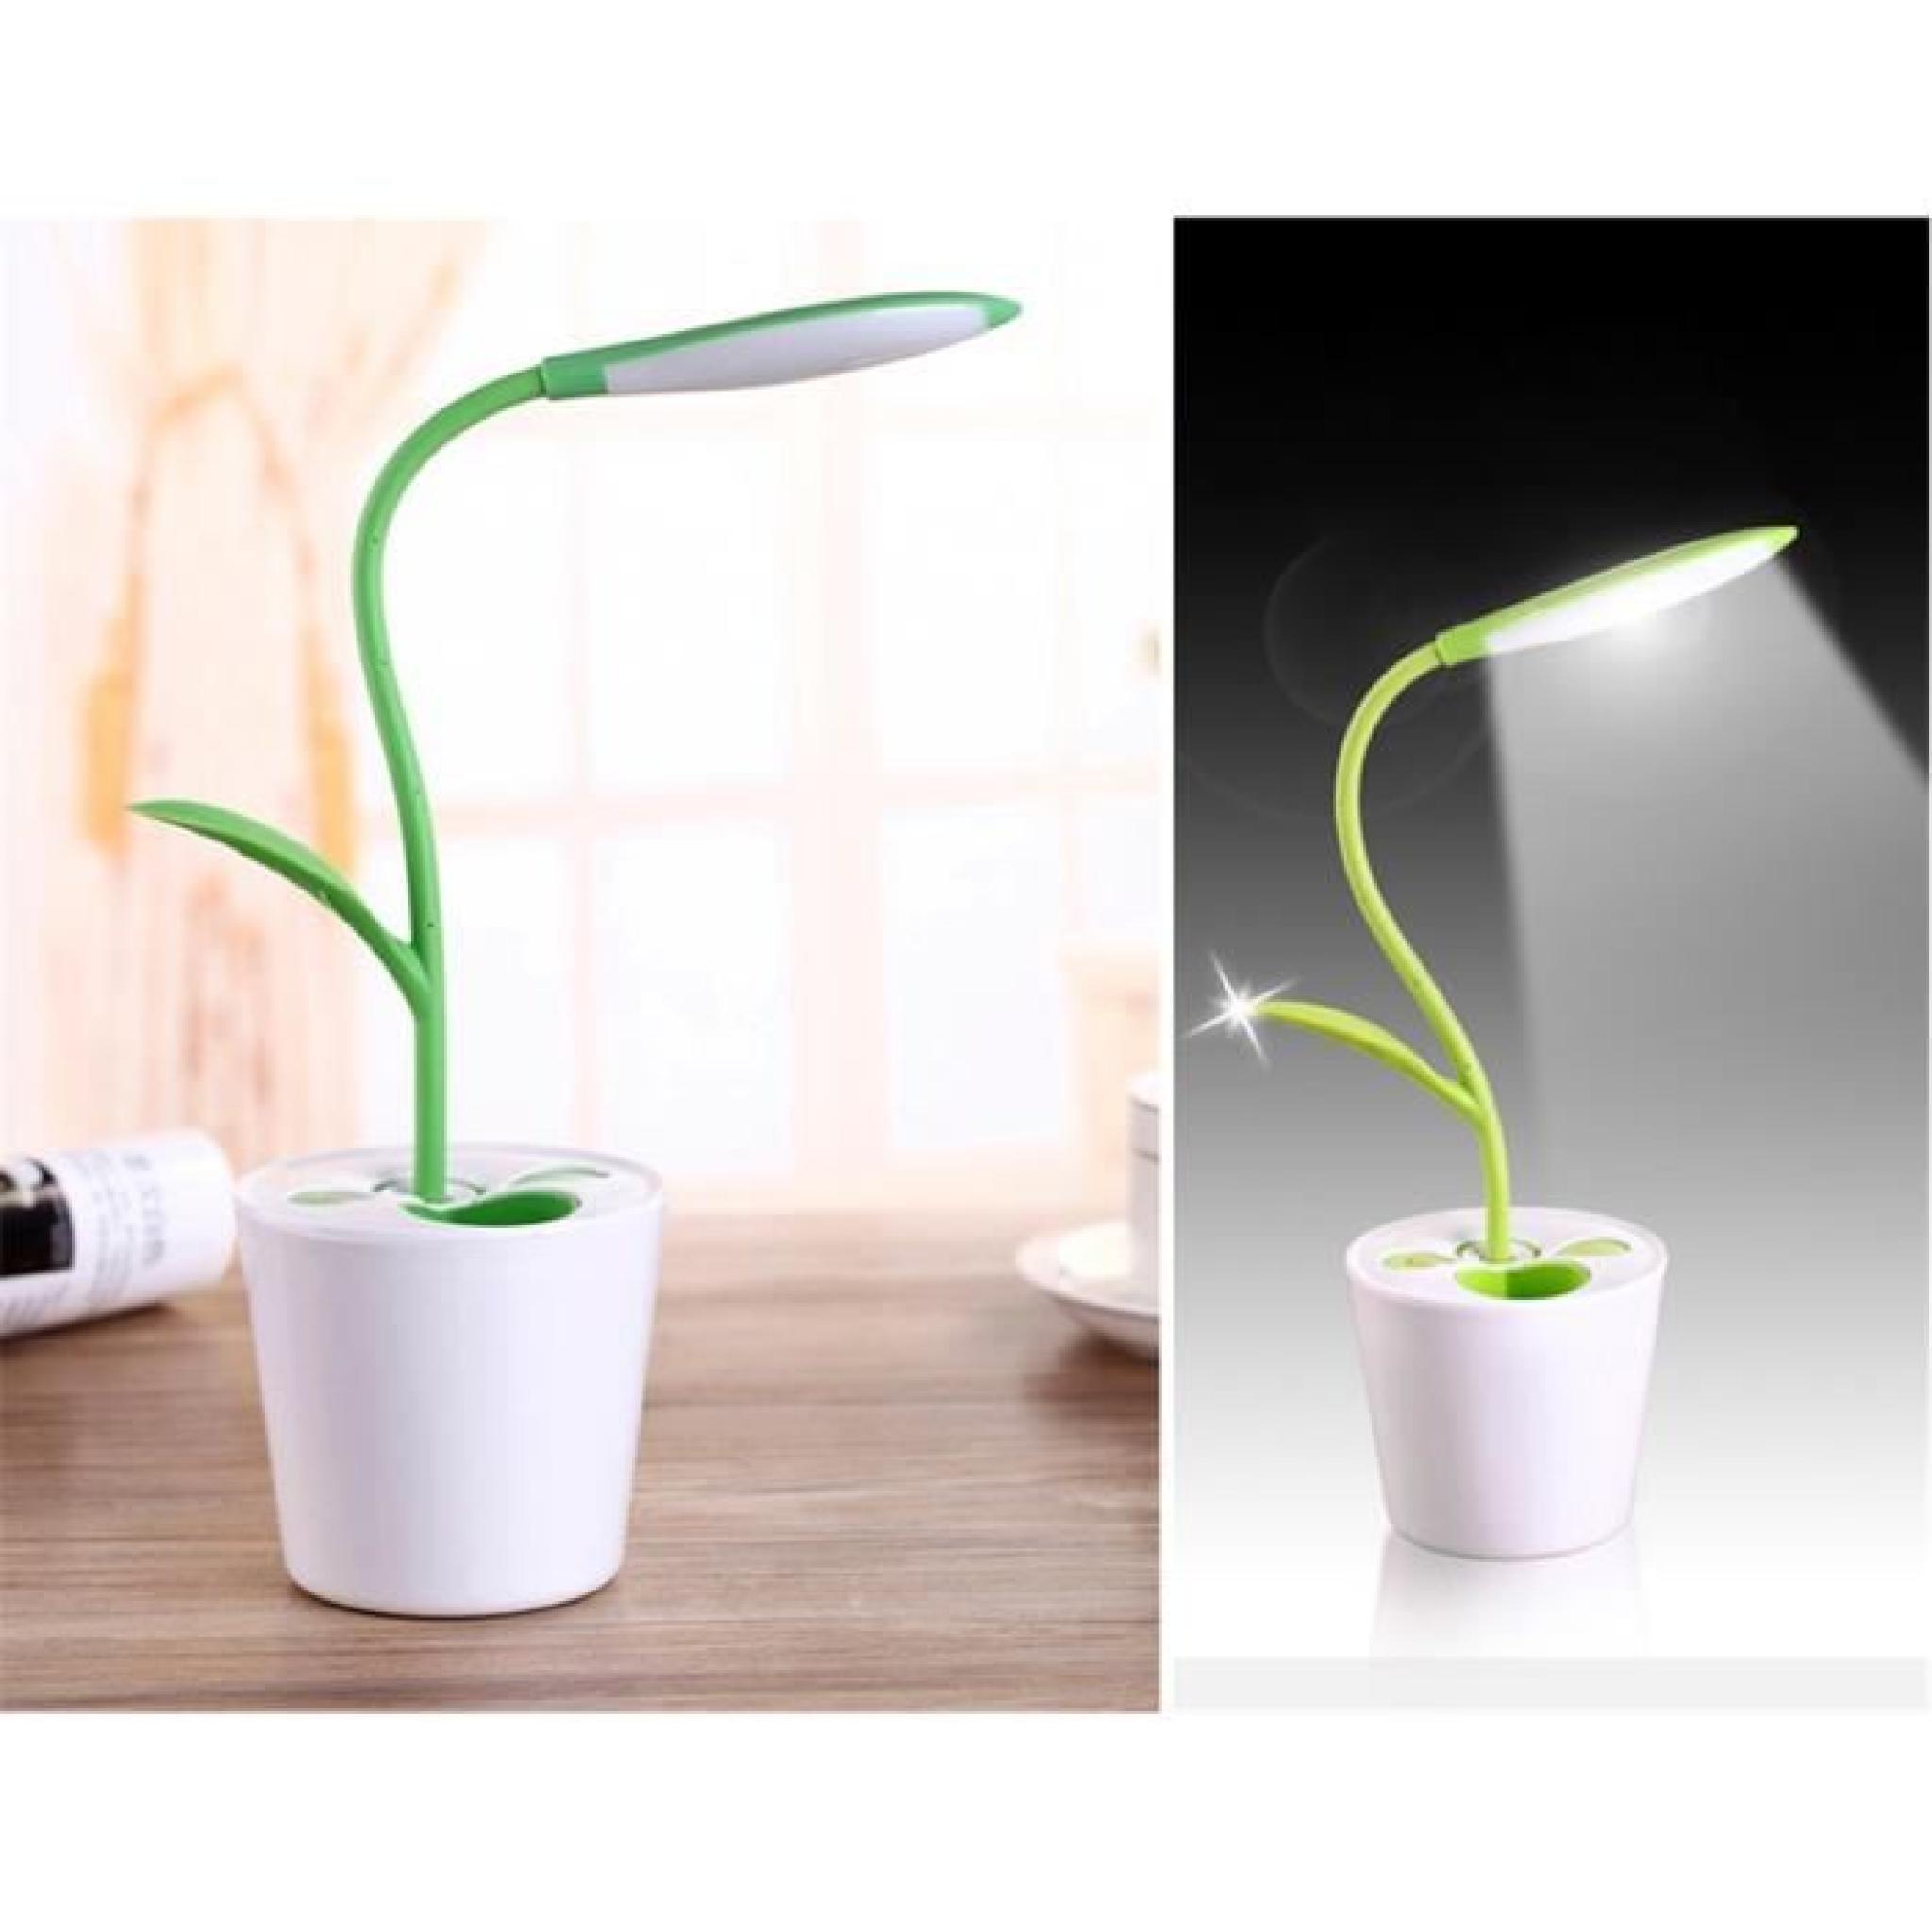 créative pois rechargeable semis conception stylo conteneur oeil-protection table lampe 28green )